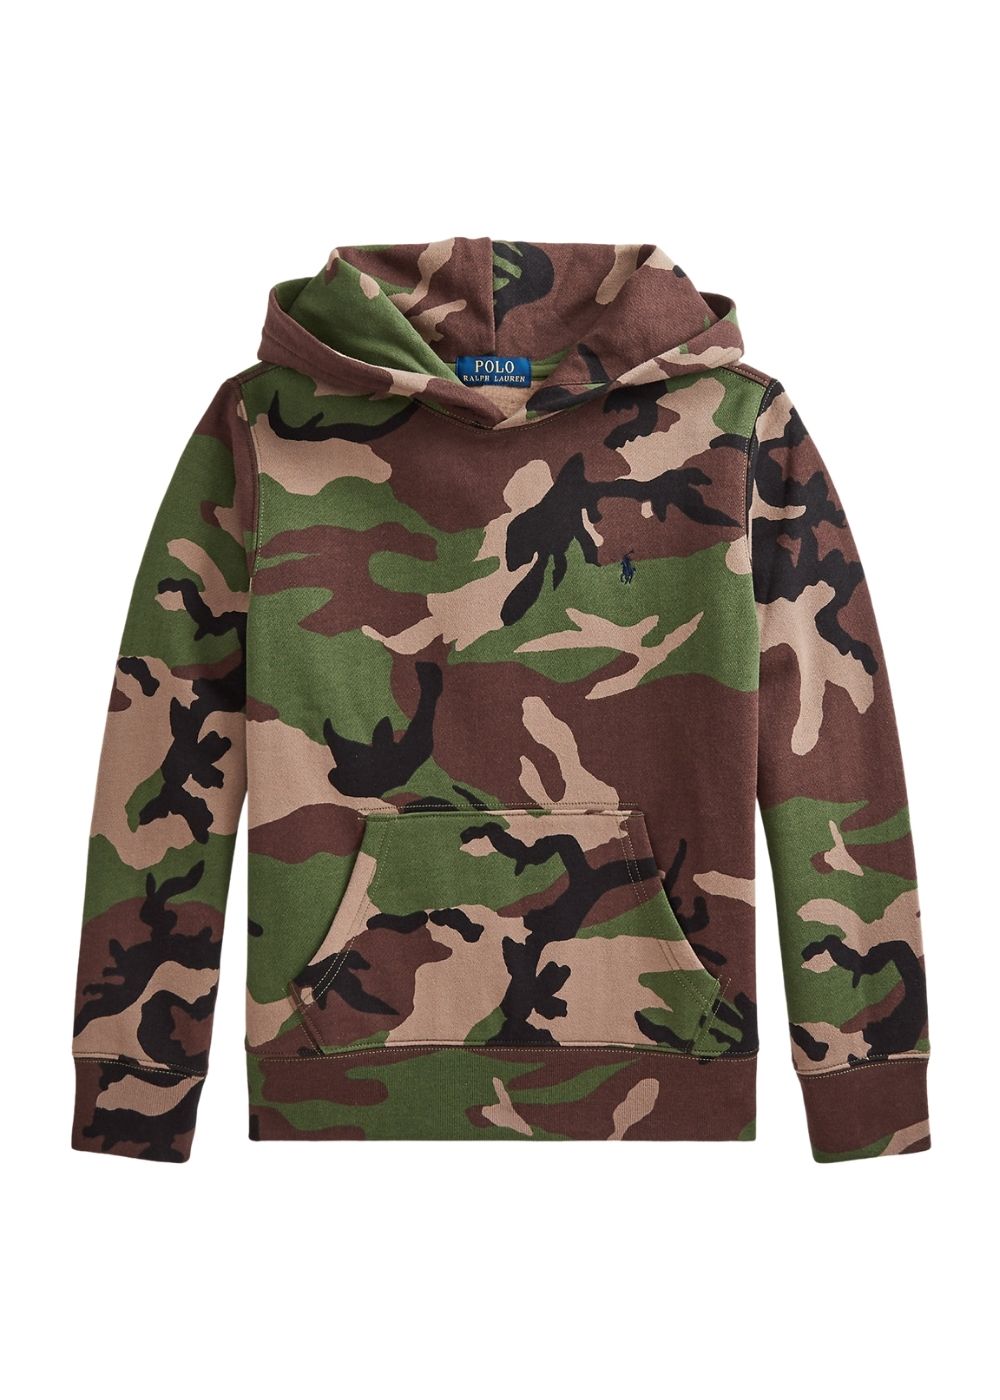 Featured image for “POLO RALPH LAUREN FELPA CAMOUFLAGE”